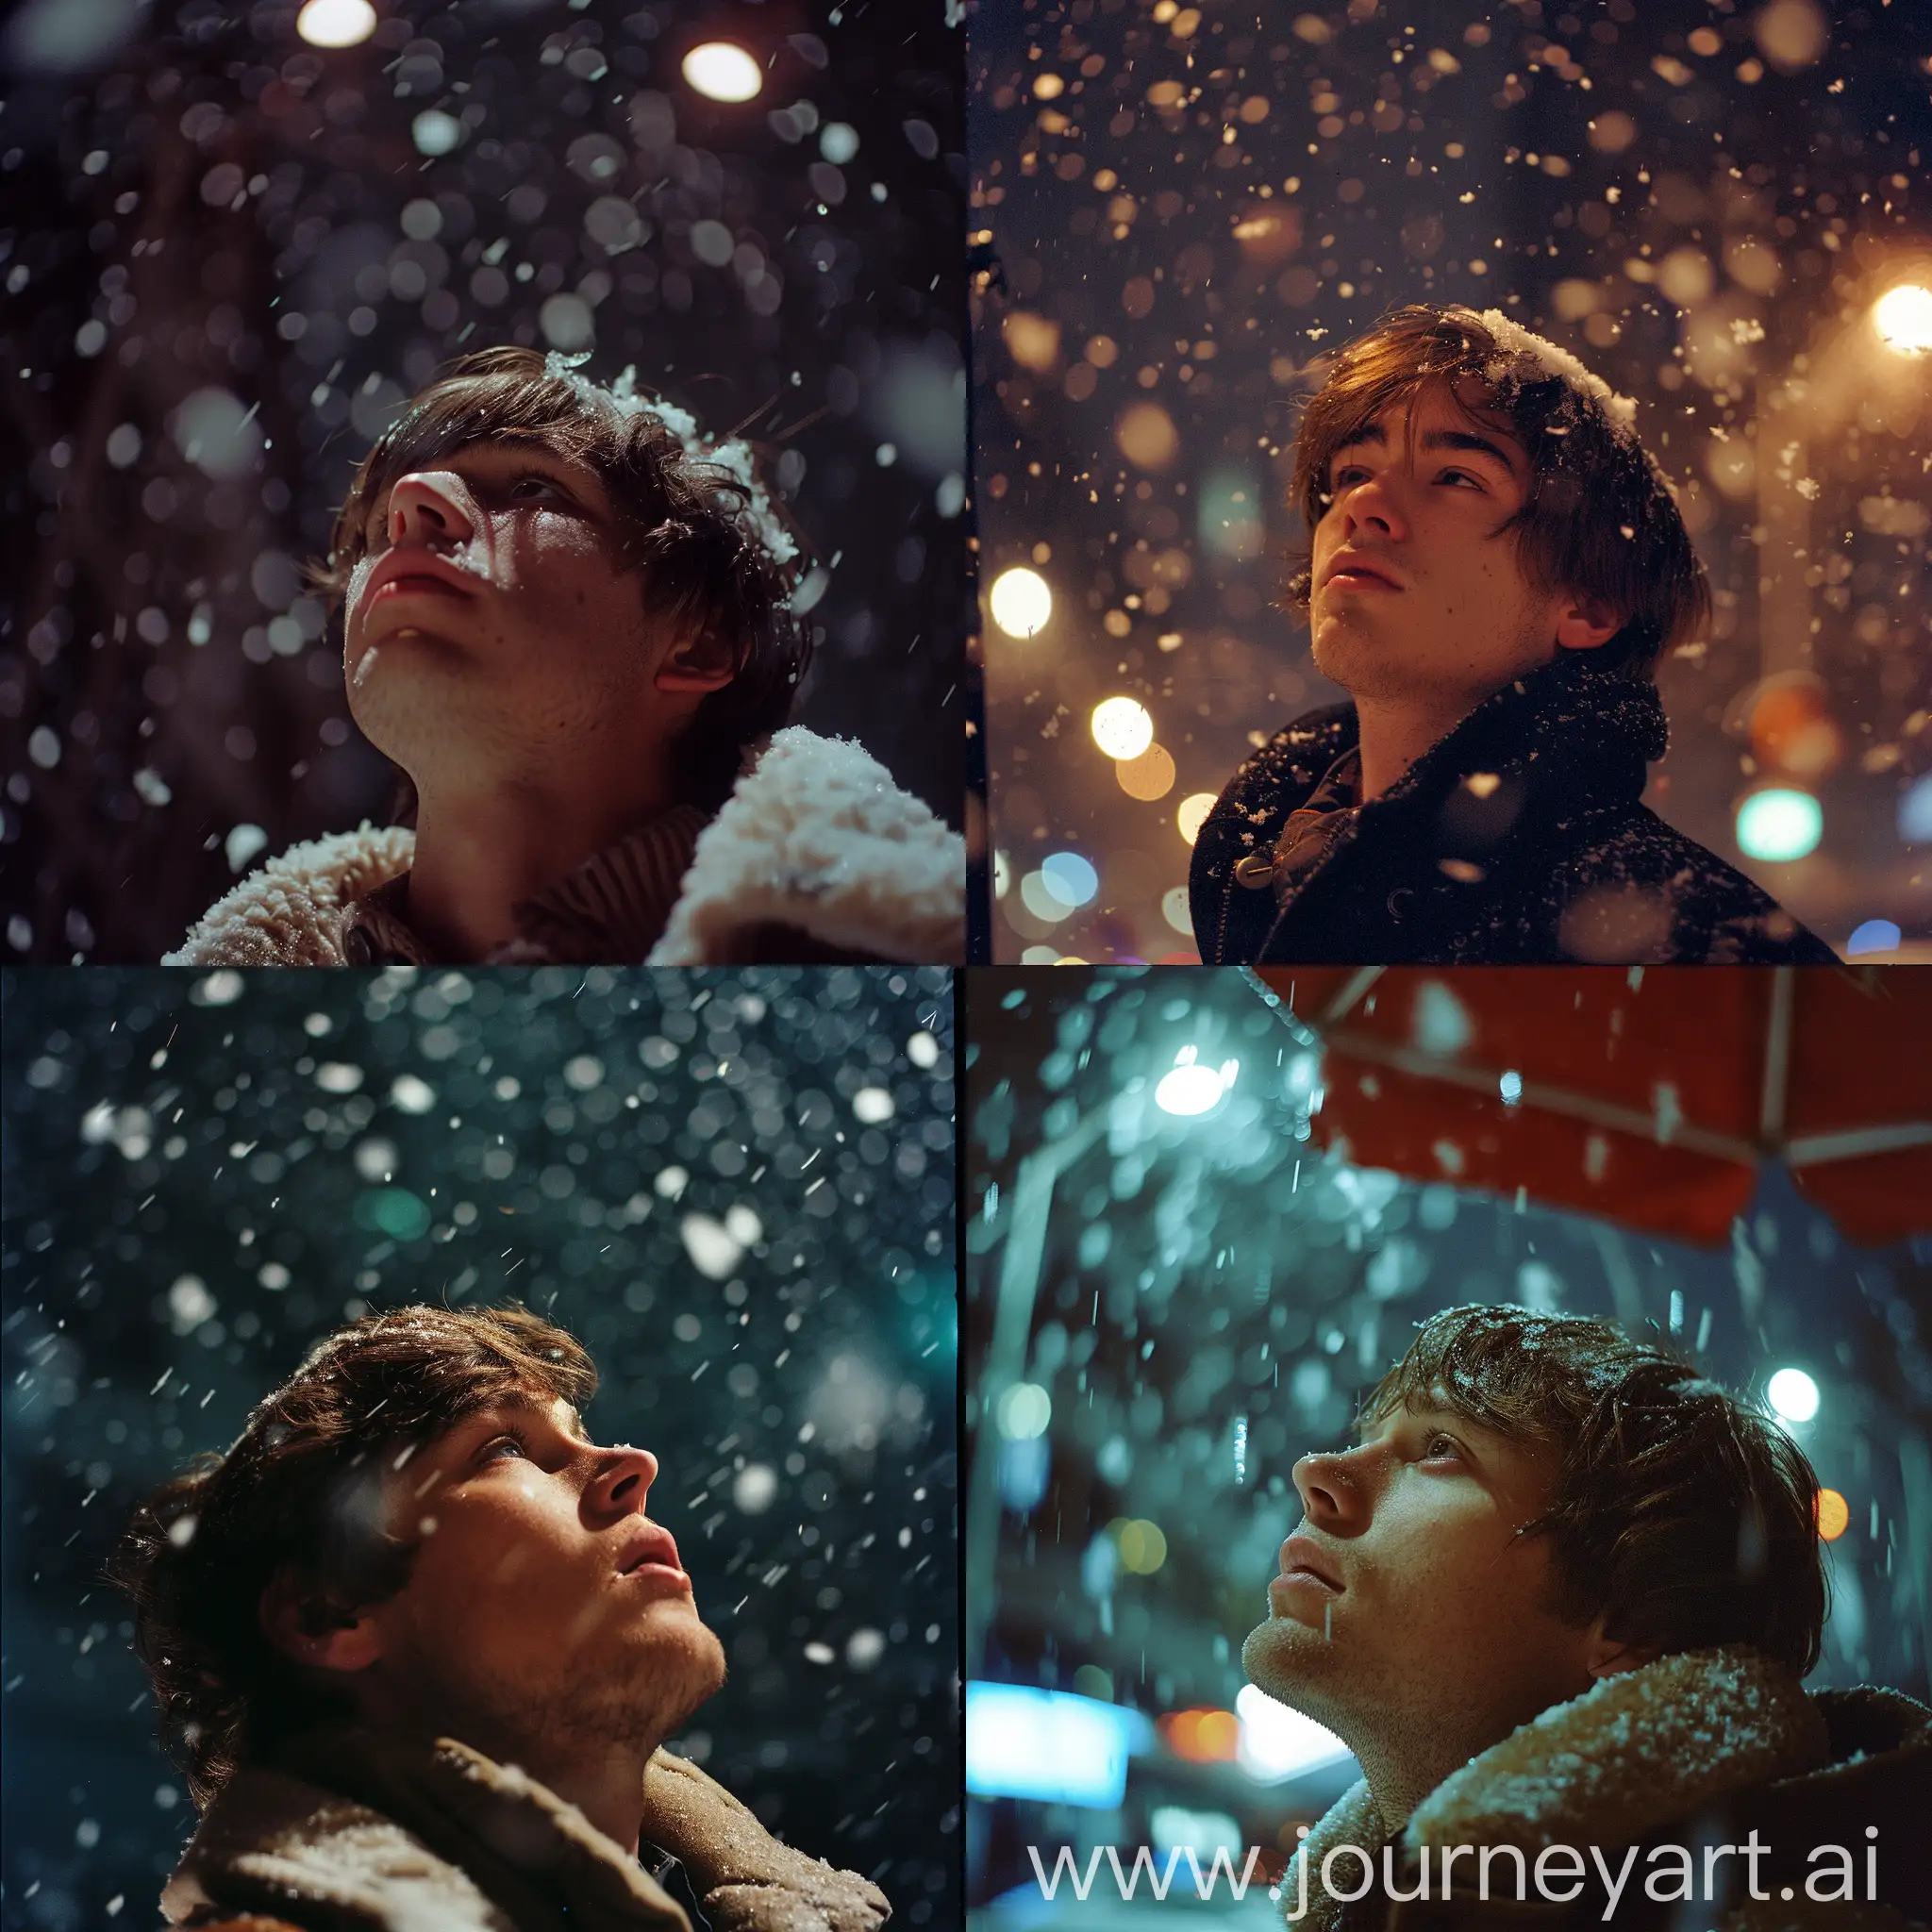 Cinematic-Portrait-Man-with-Brown-Hair-in-Snowstorm-at-Night